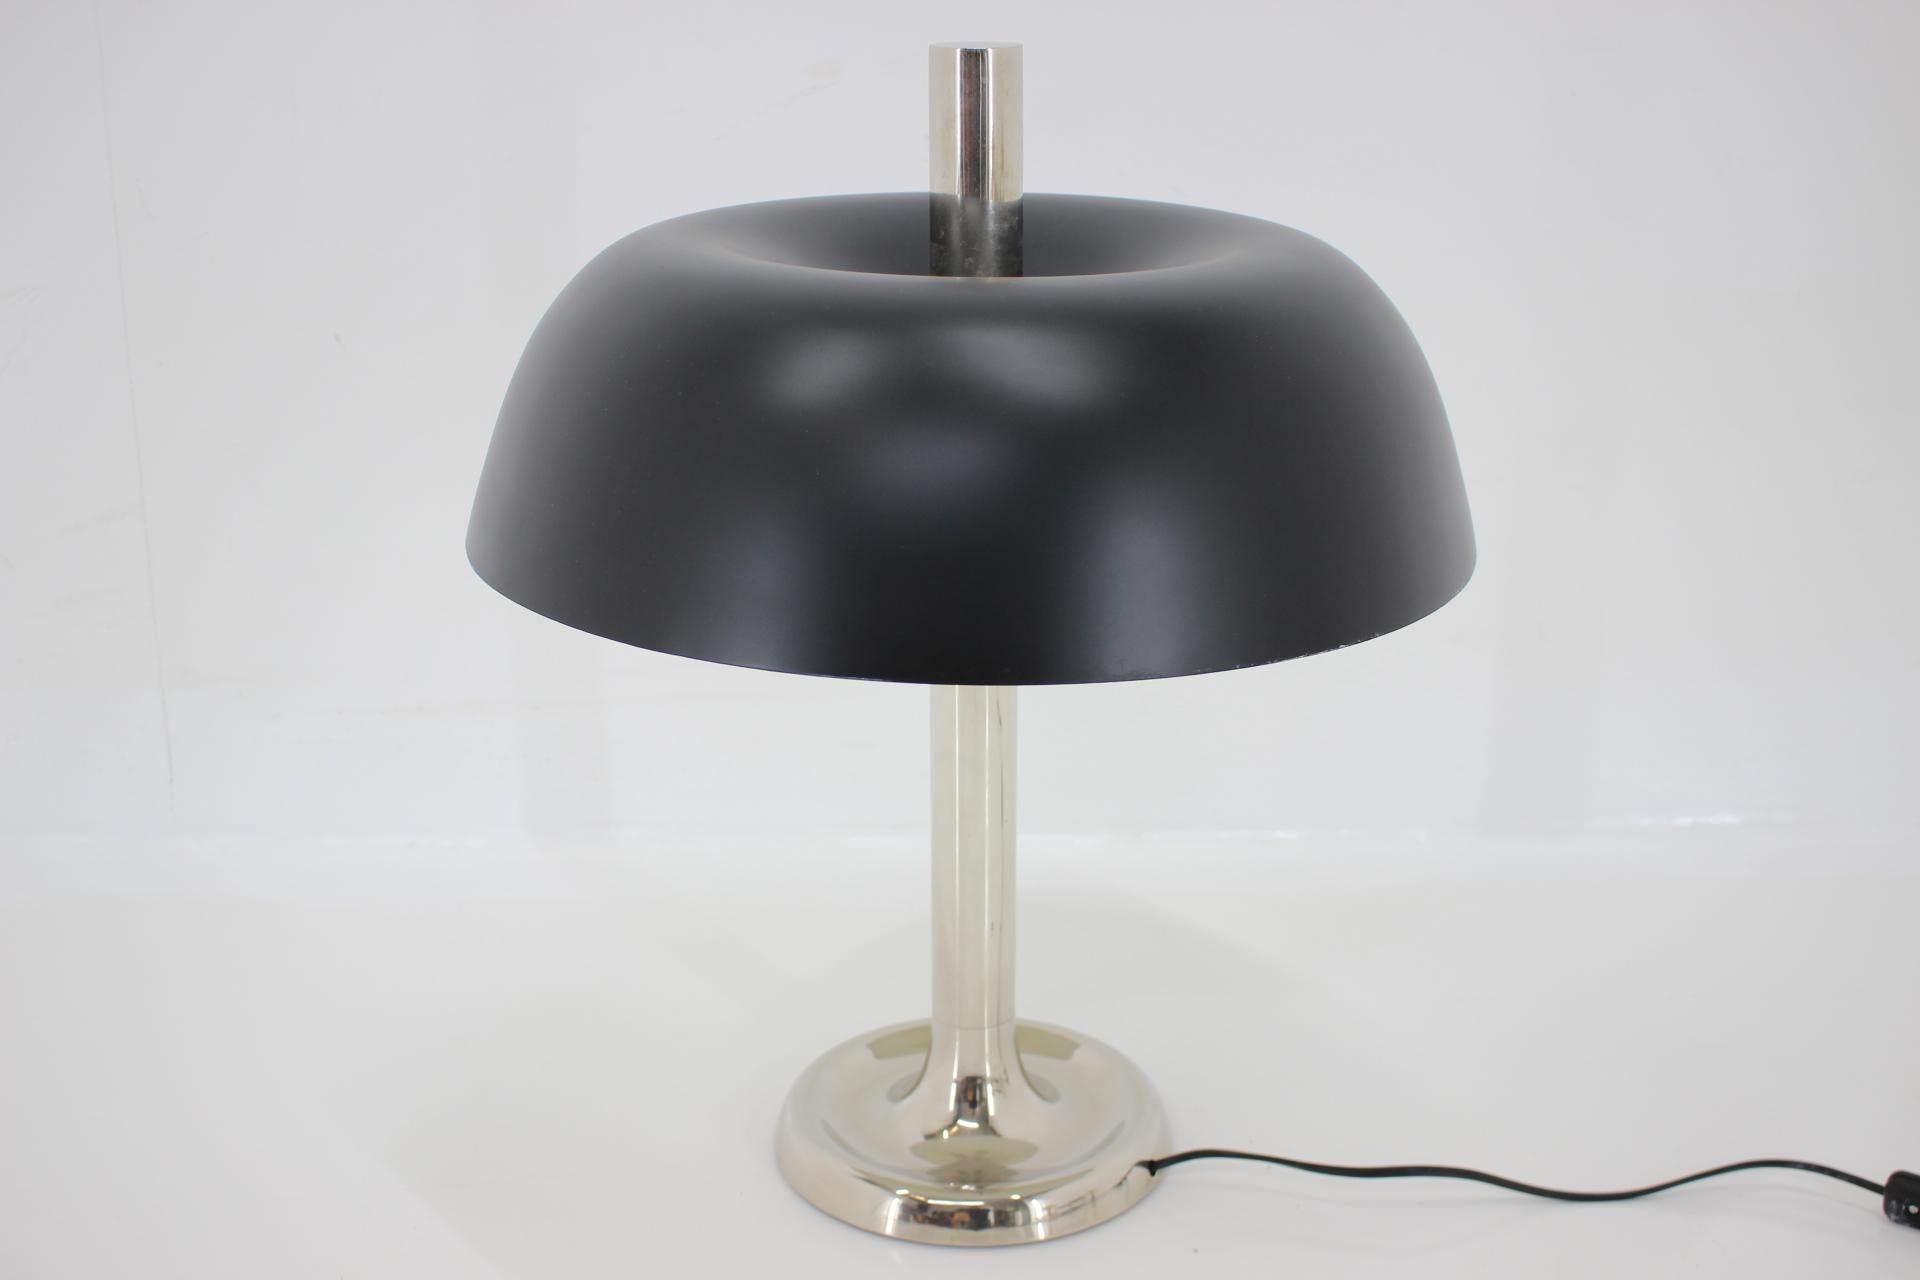 Big Design Extra Large Midcentury Mushroom Table Lamp by Hillebrand, 1970s In Good Condition For Sale In Praha, CZ